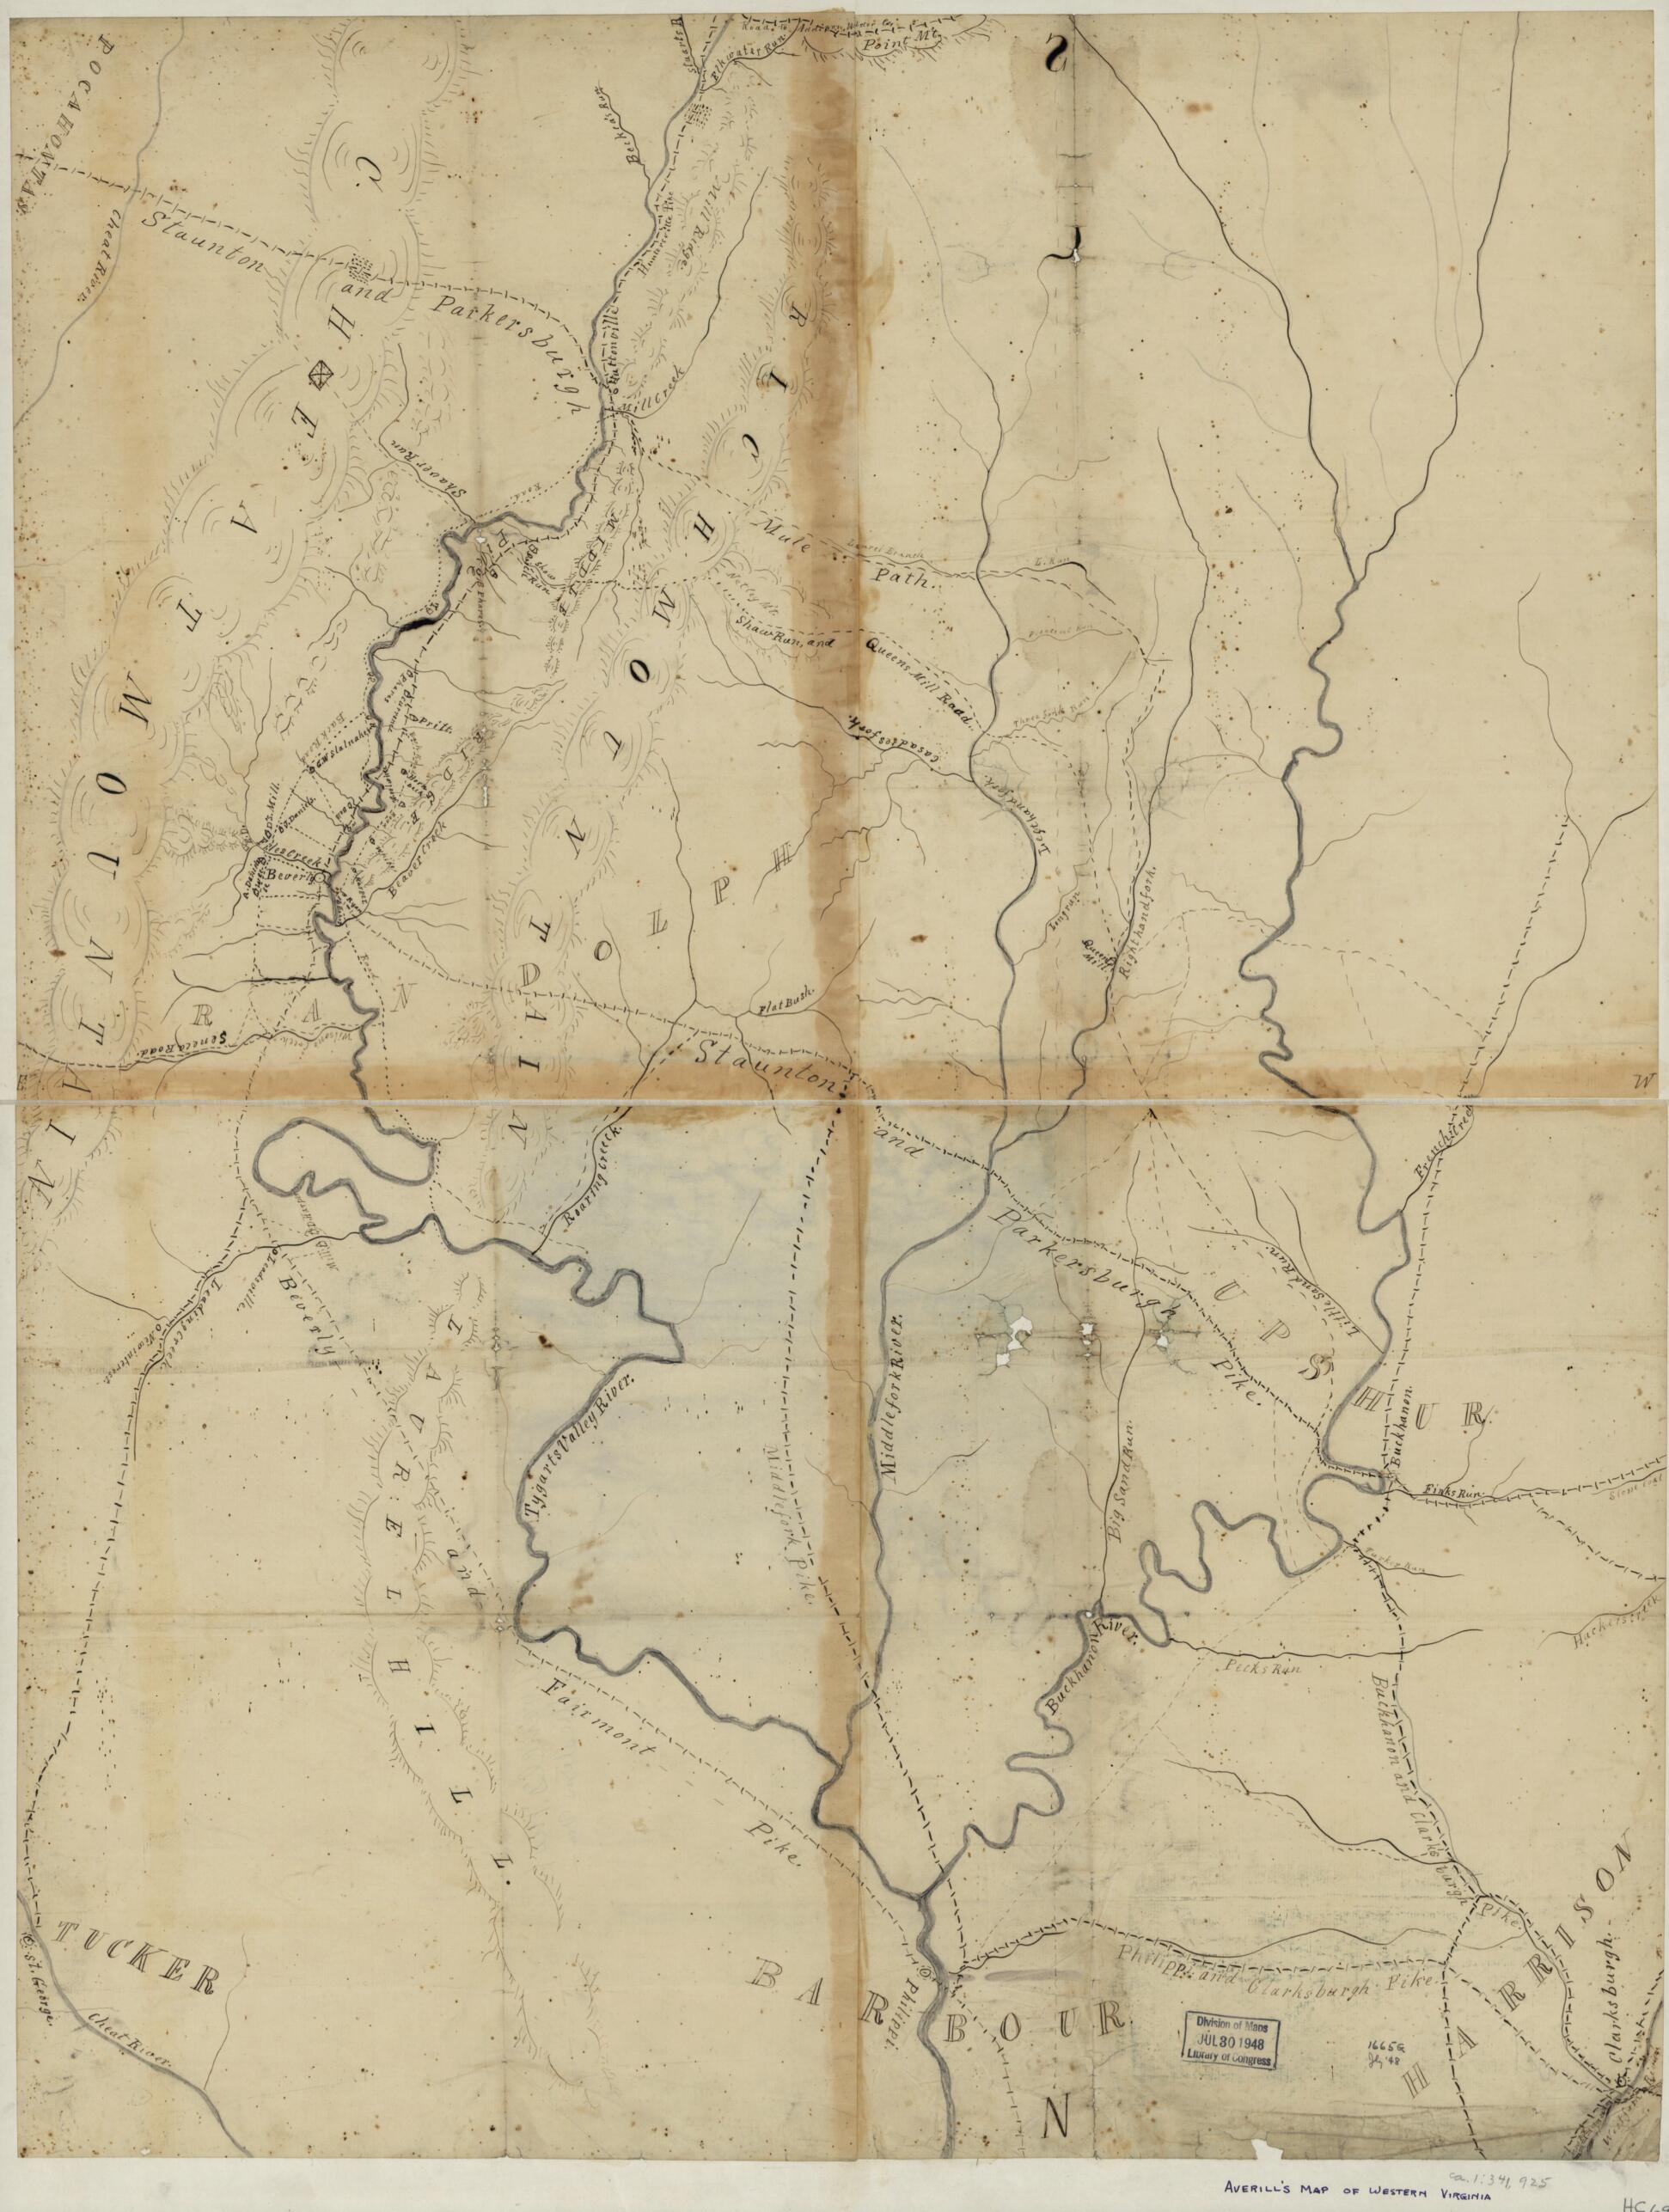 This old map of Averill&